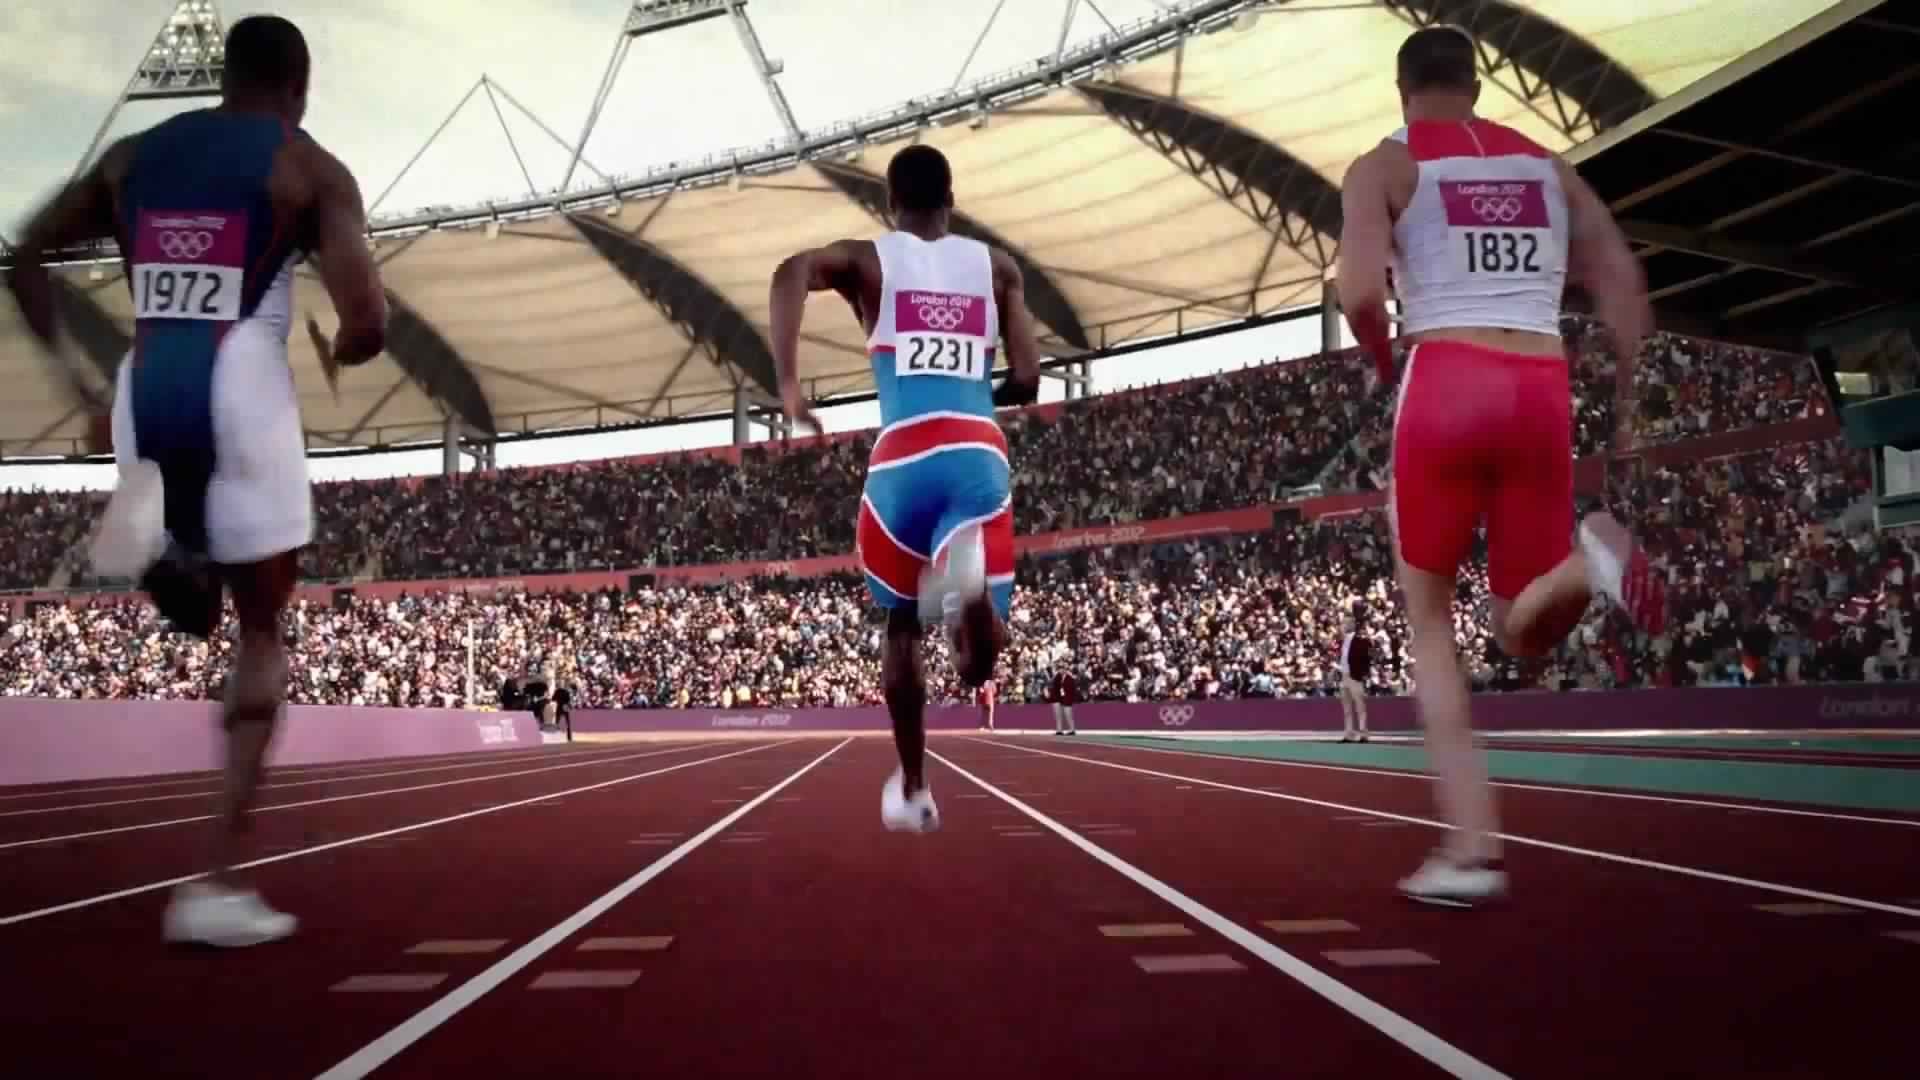 The 2012 London Olympic Games